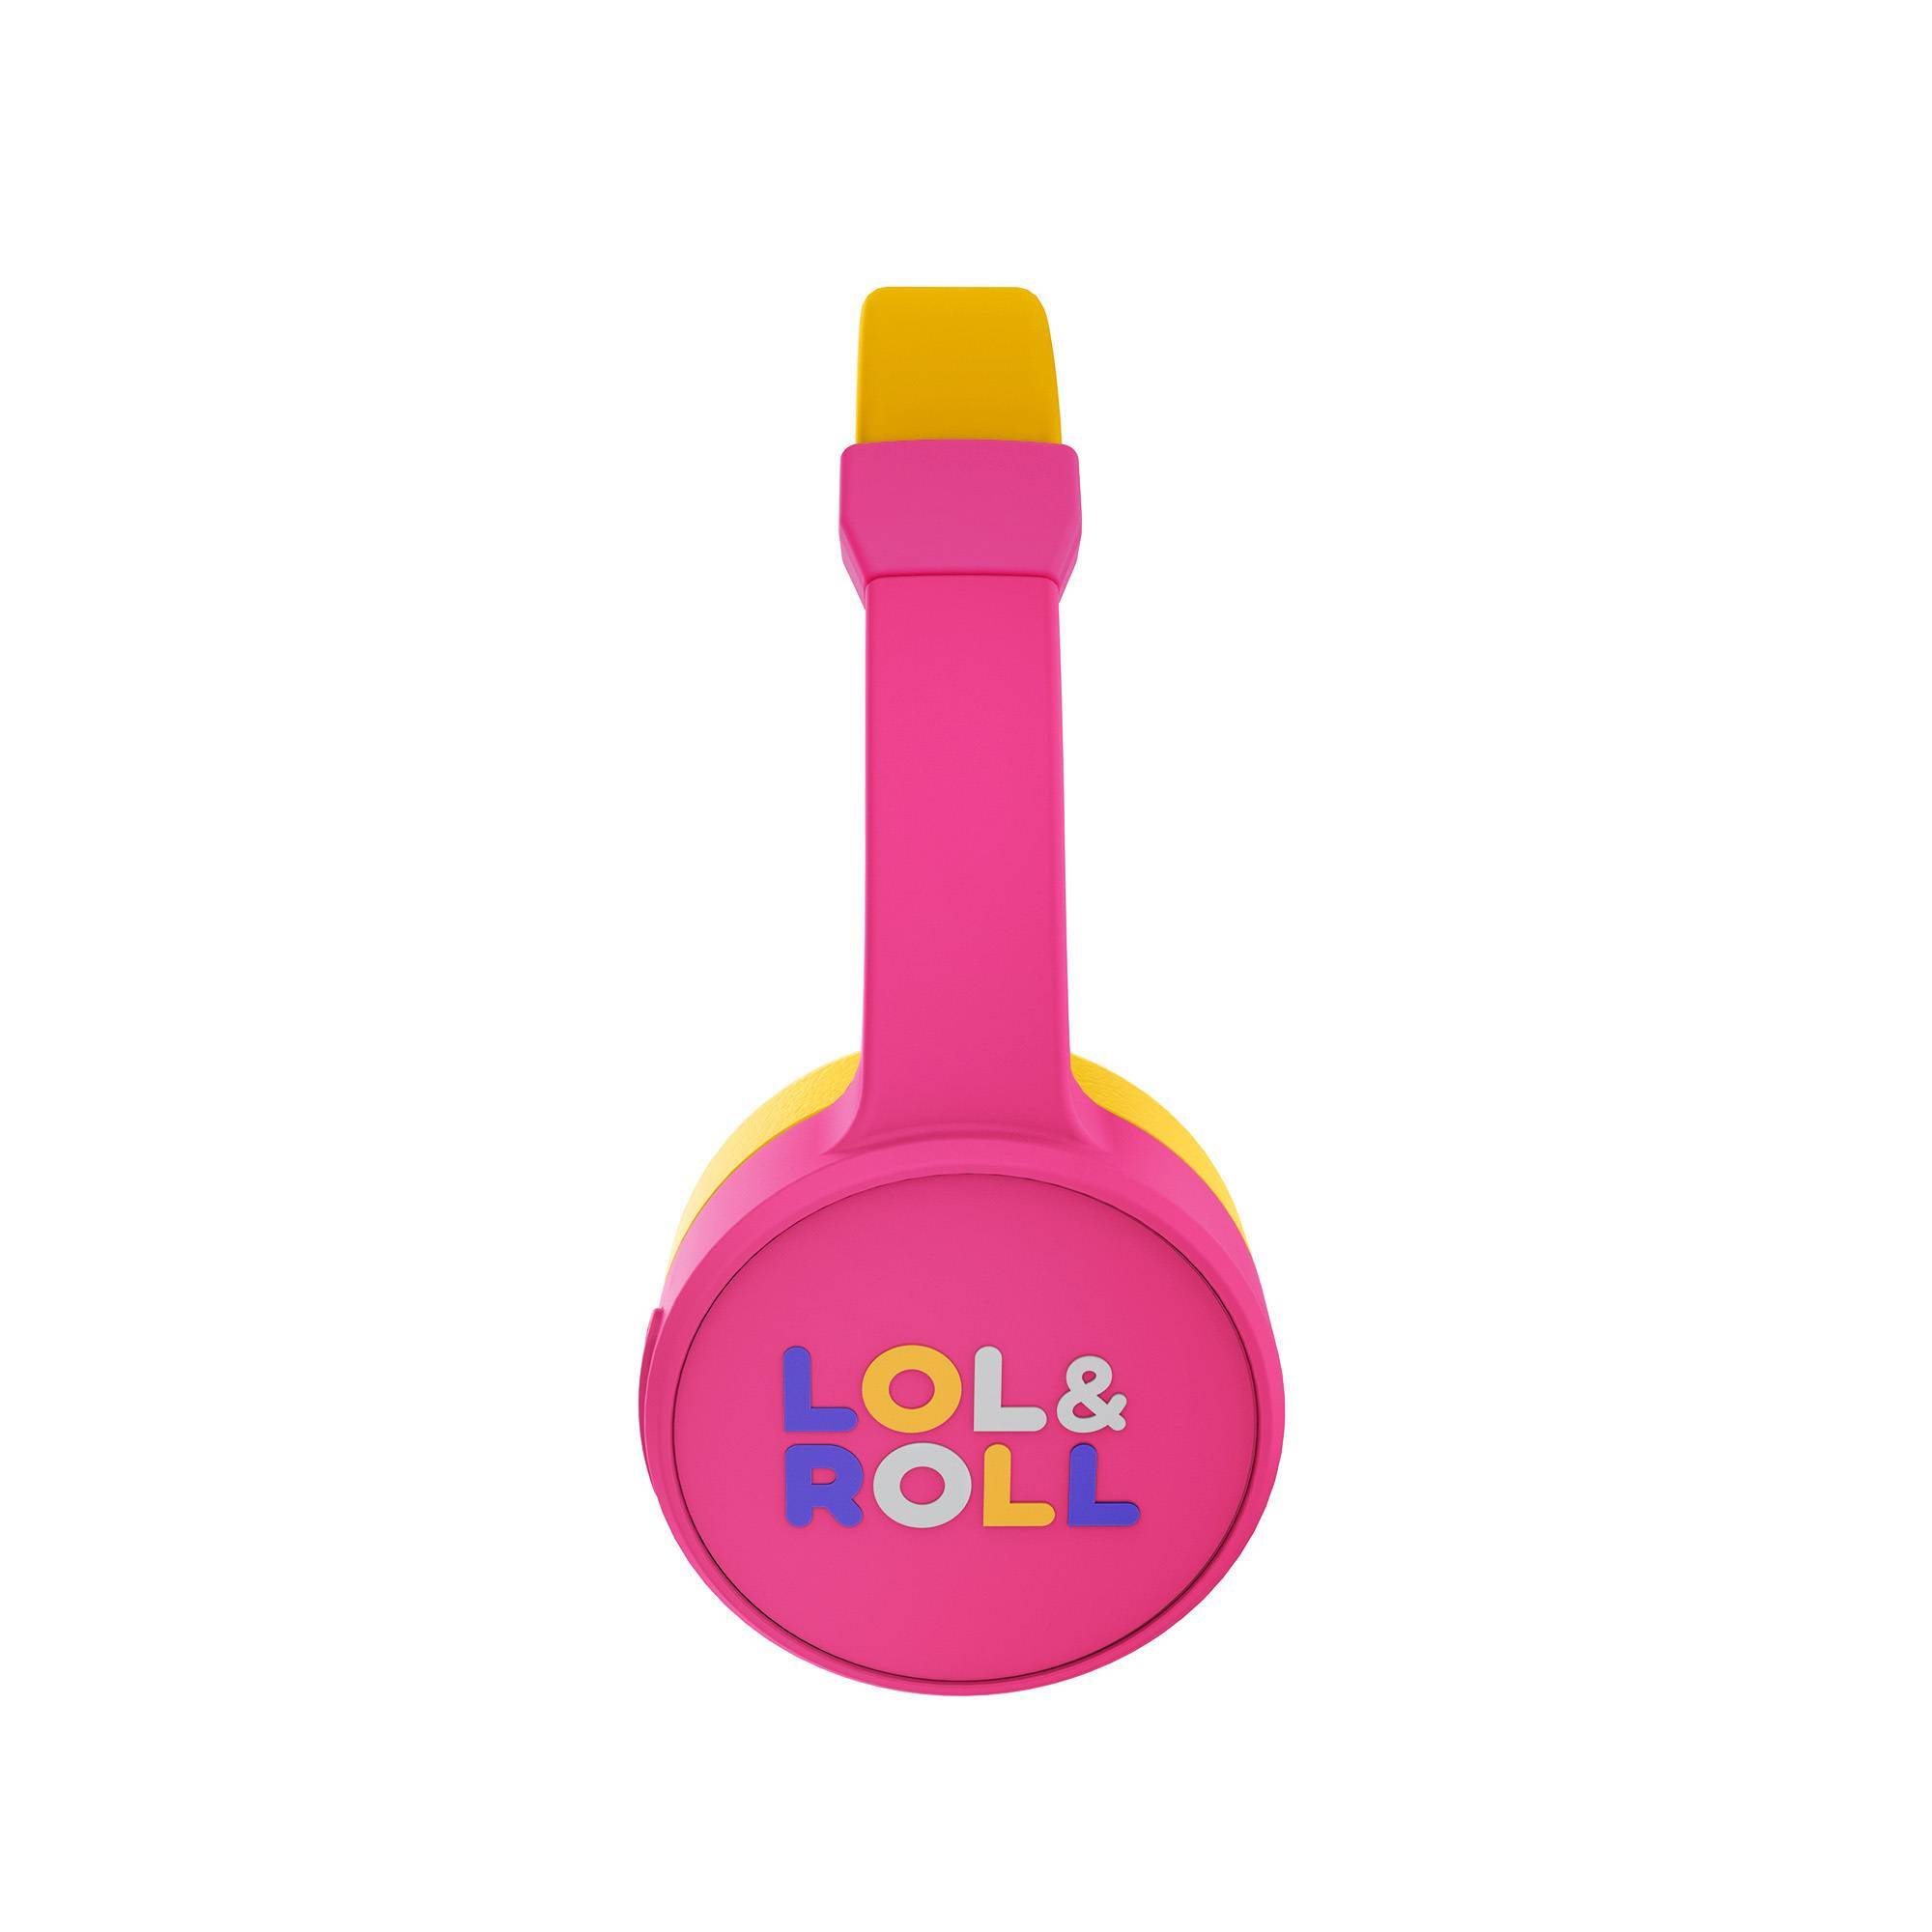 Lol&Roll Pop headset for kids with built-in microphone